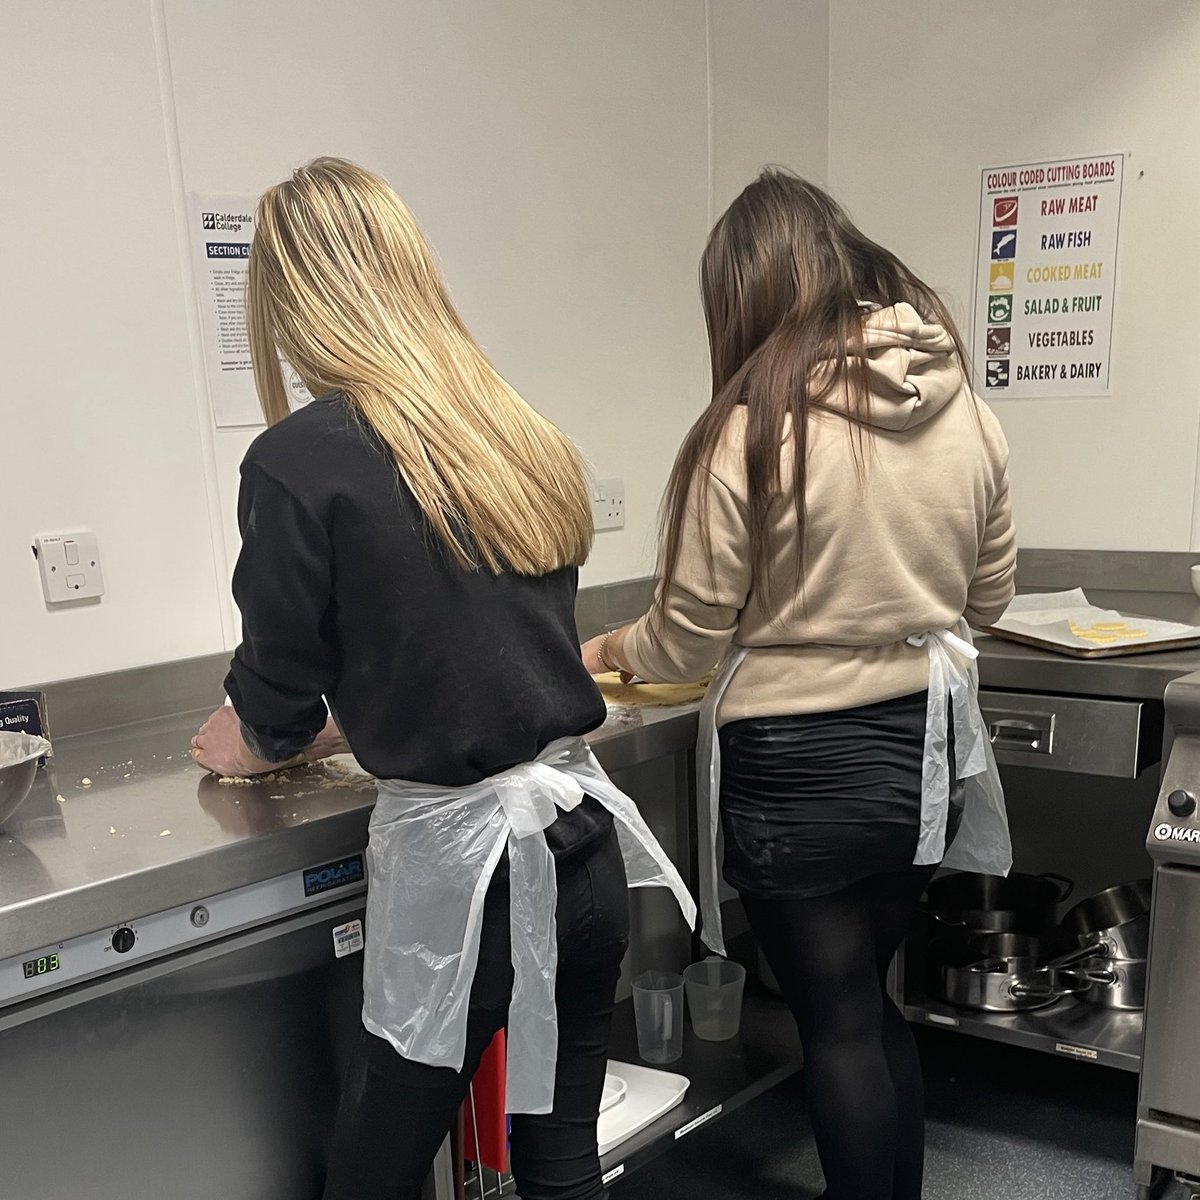 Key Stage 4 pupils had a great visit to the catering department at Calderdale College yesterday. ⁦@ImpactMAT⁩